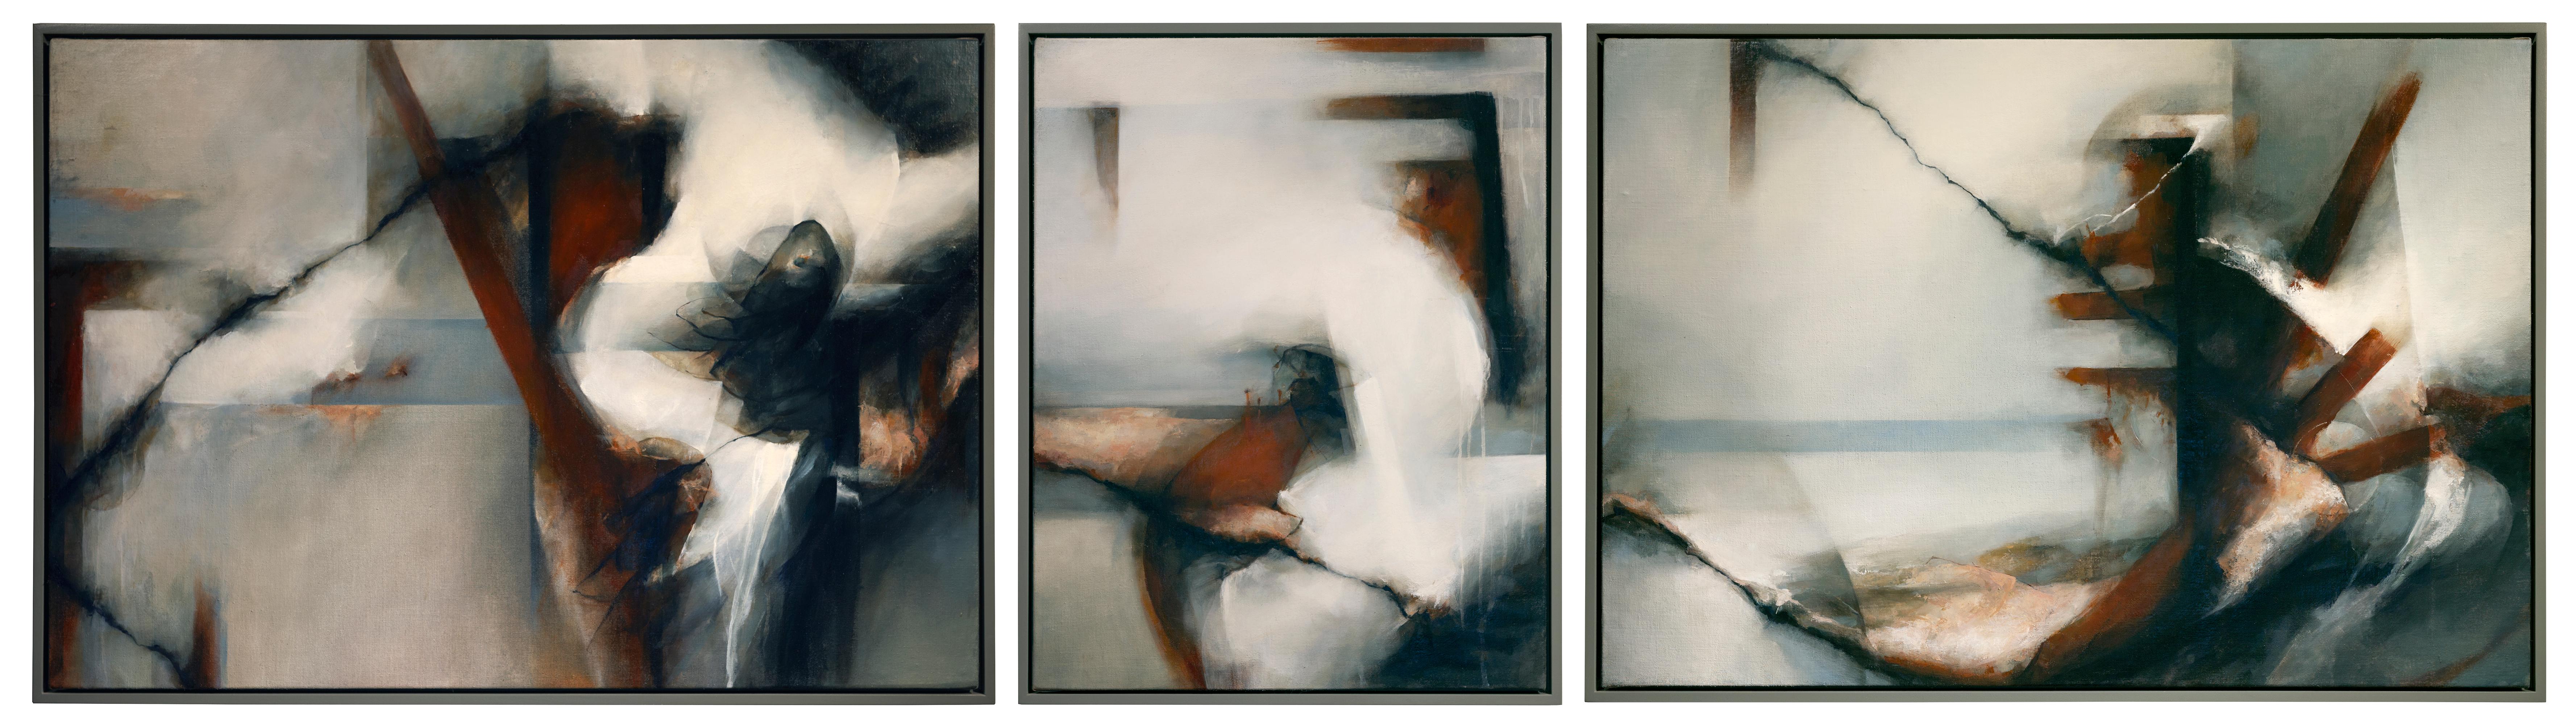 David Mellen Abstract Painting - Oil on Linen Abstract Triptych Painting: 'Ostend' 